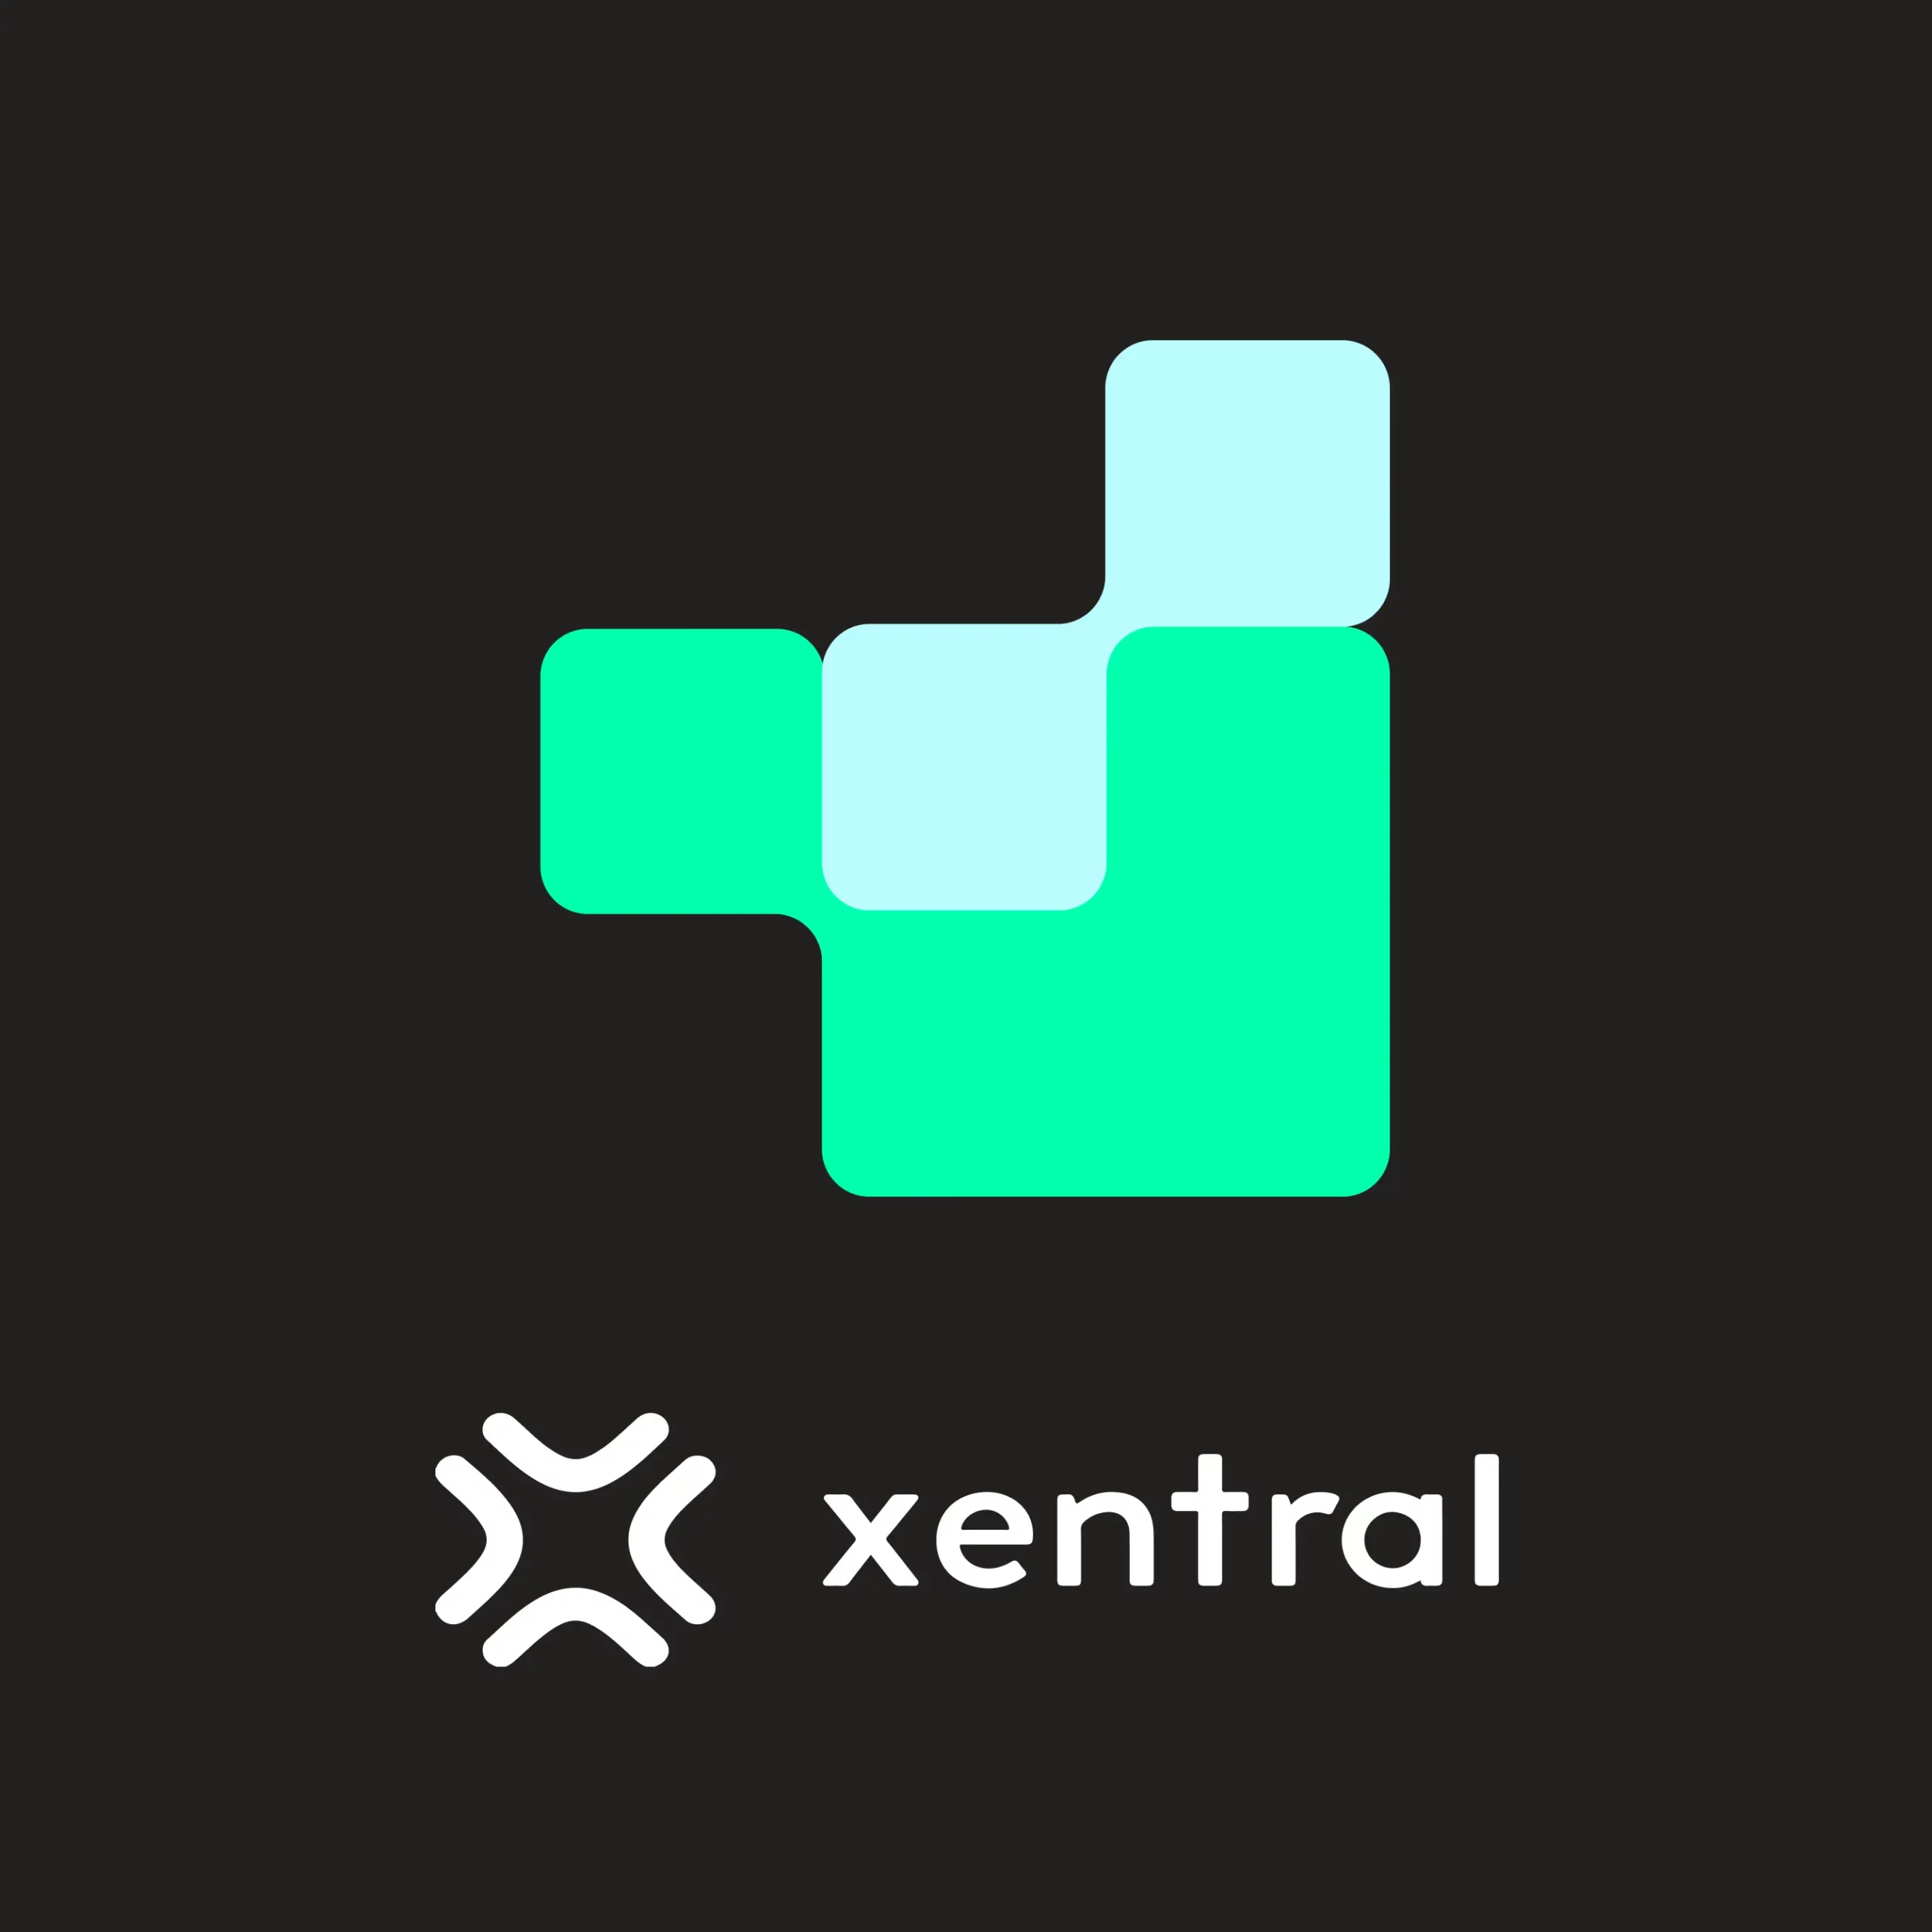 Xentral case study - Logistics solution everstox